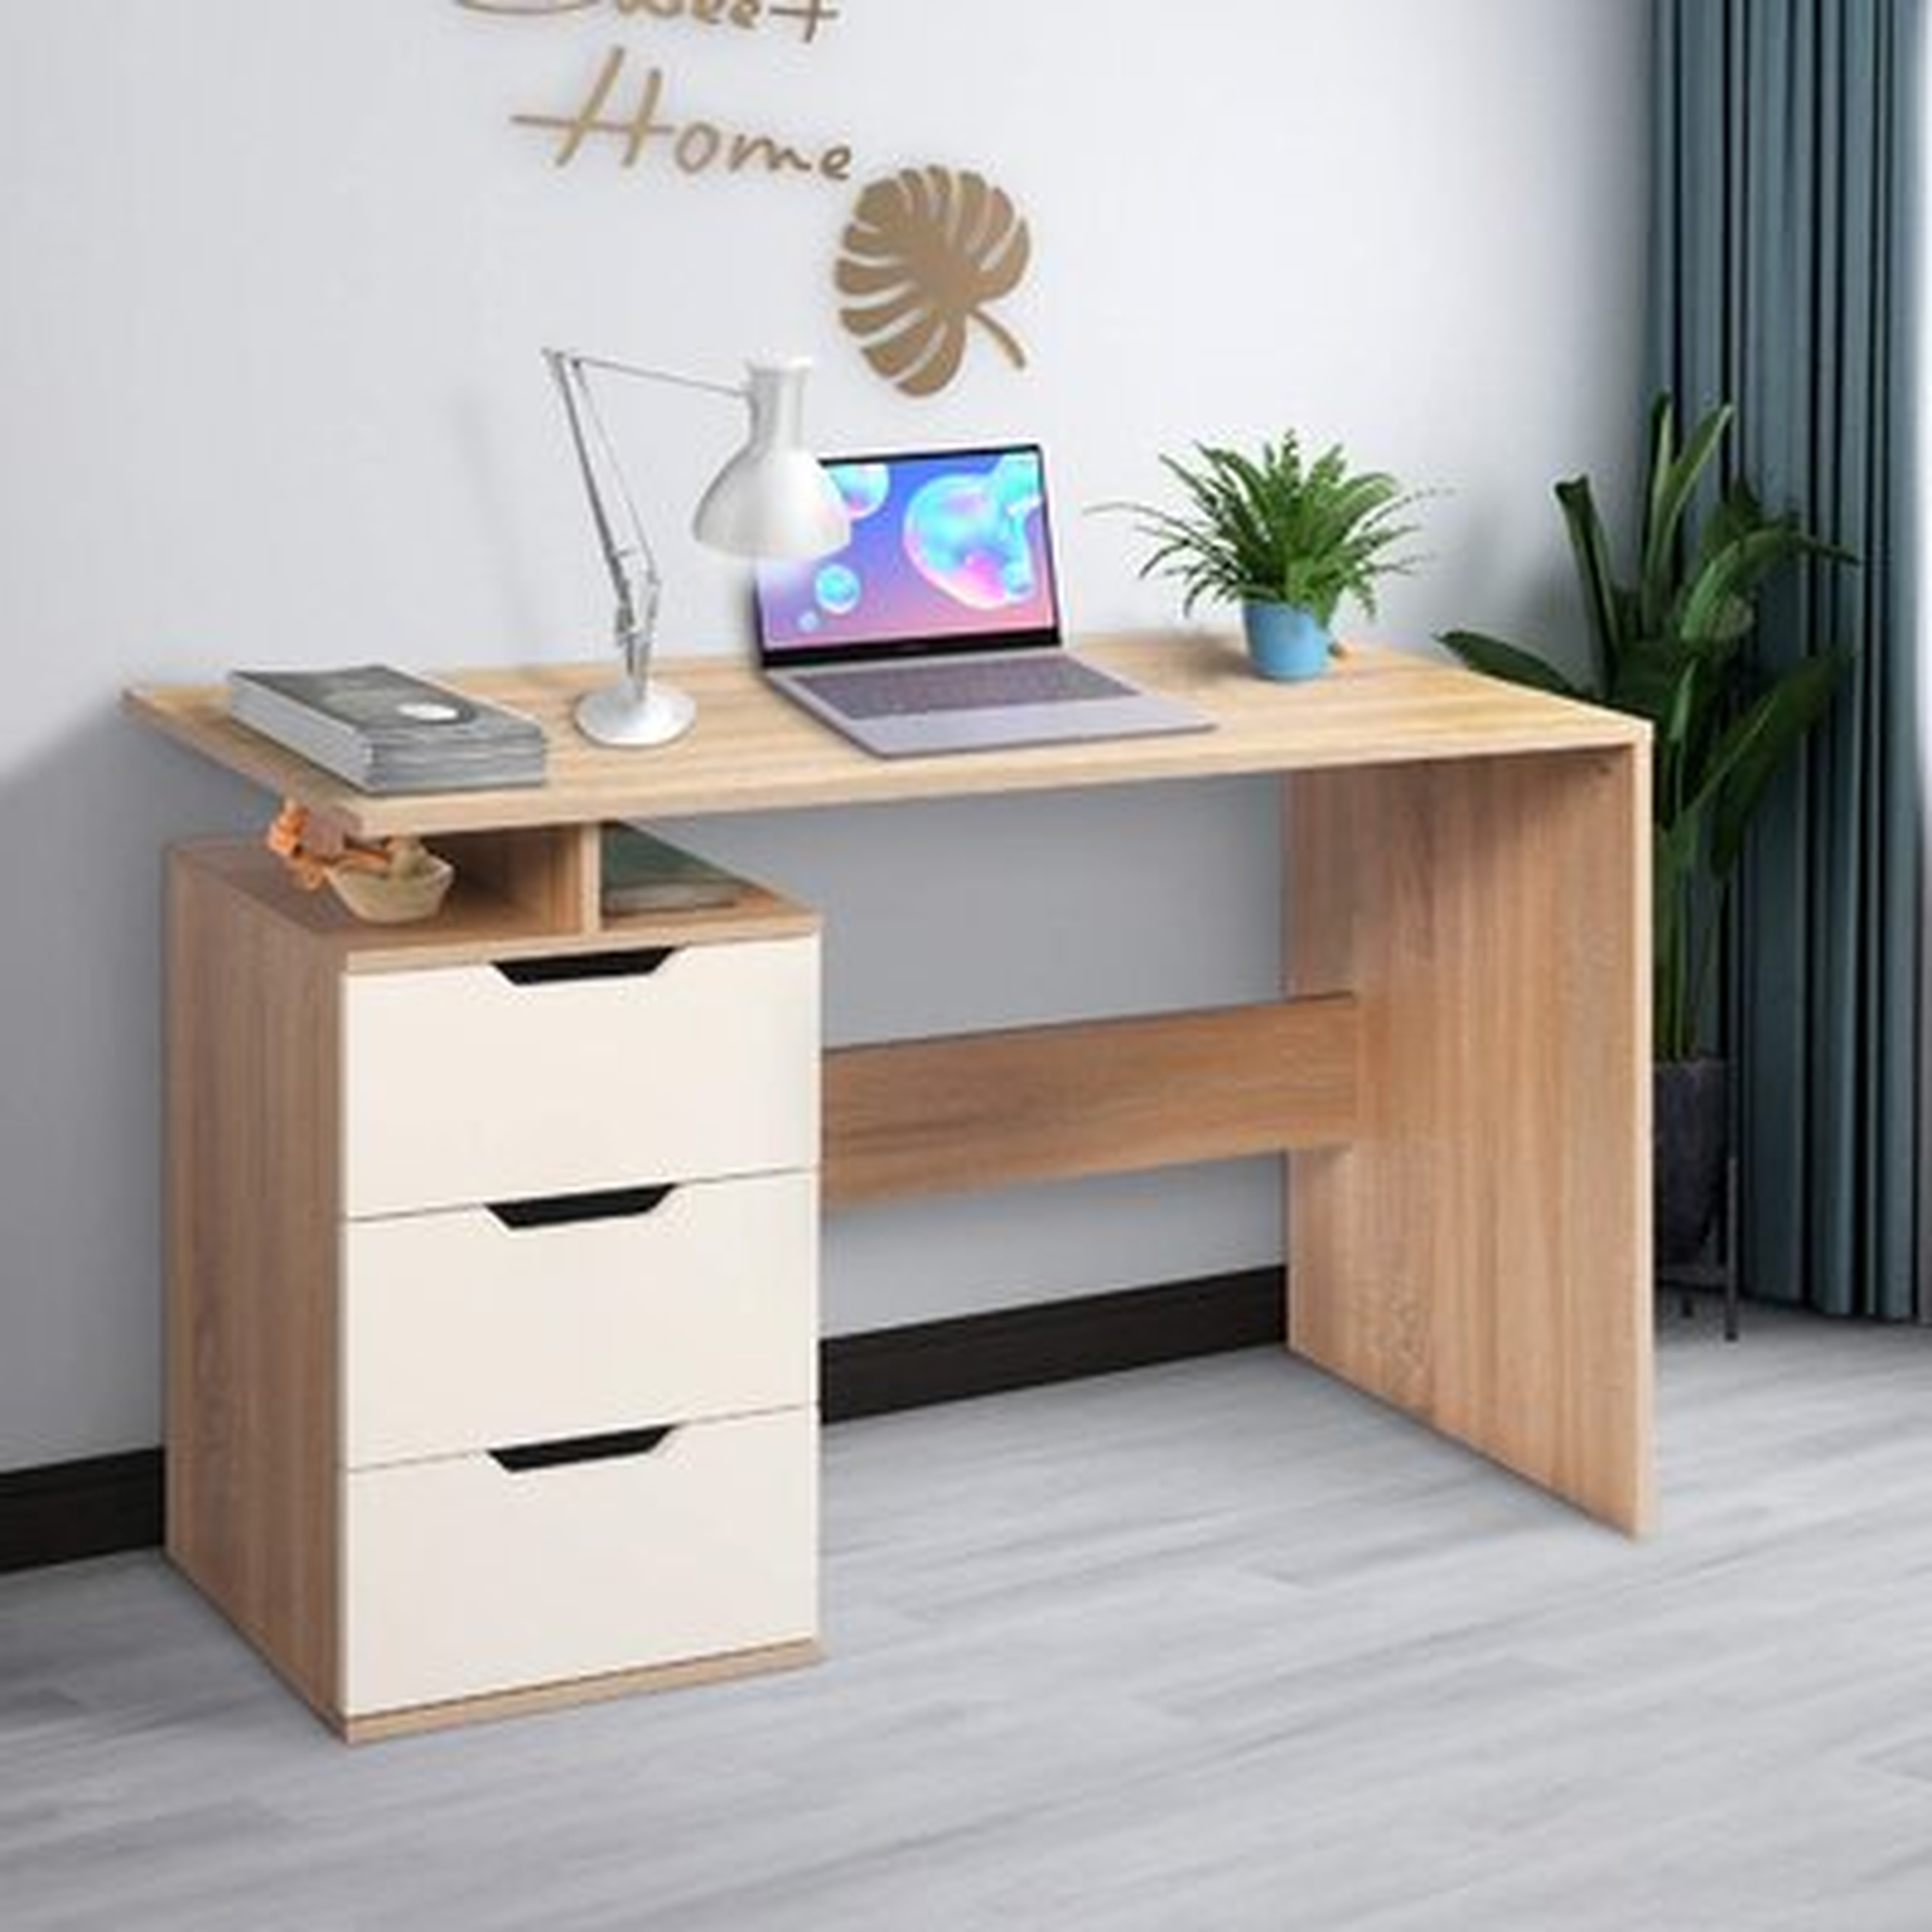 Wooden Computer Desk With Drawers Cabinet - 47" Modern Home Office Workstation Writing Desk For Laptop Notebook PC Study Table (Brown) - Wayfair